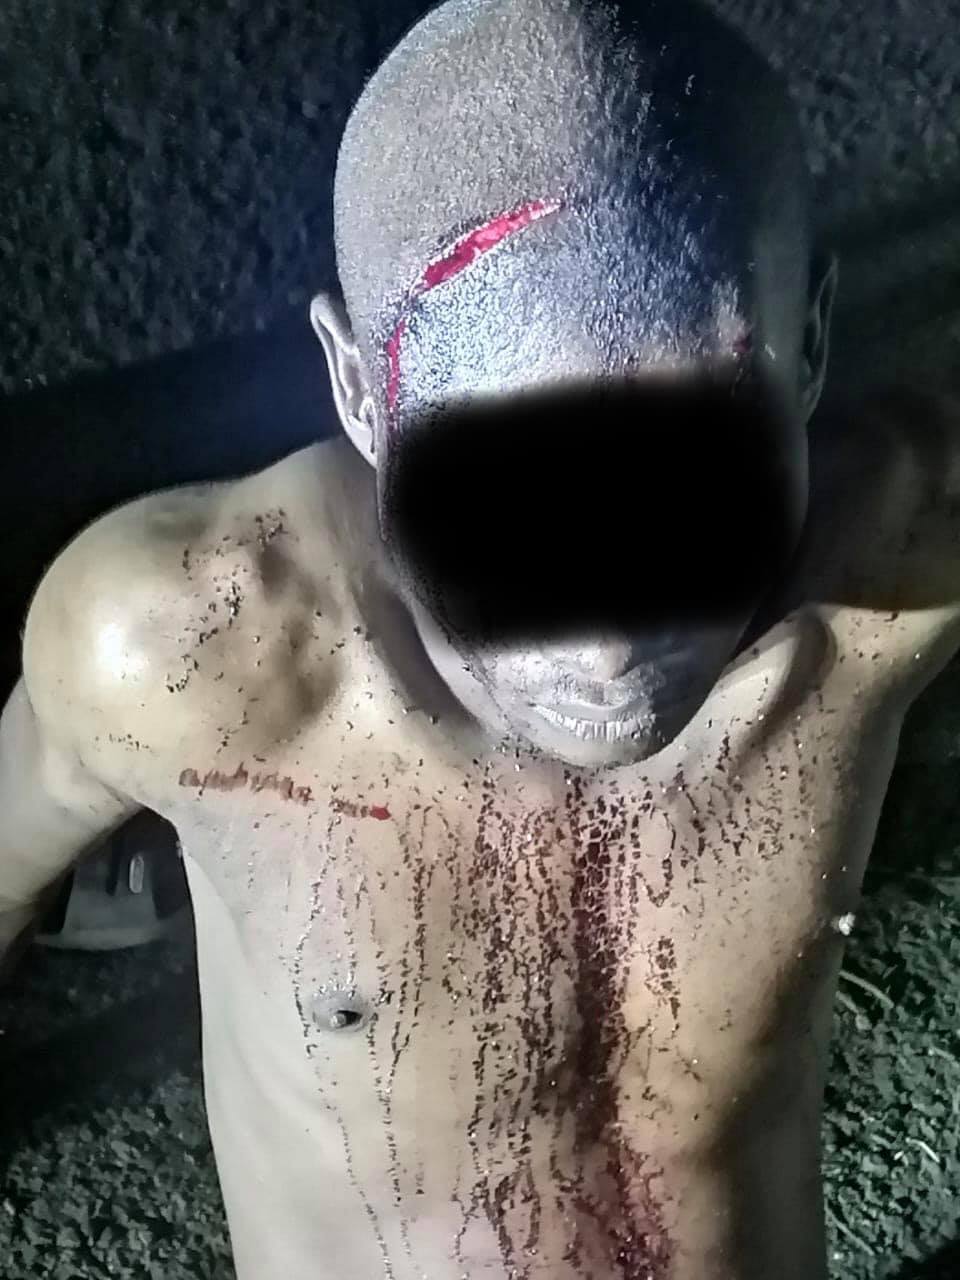 Friends Attack Each Other In a Tavern in Tongaat - KZN